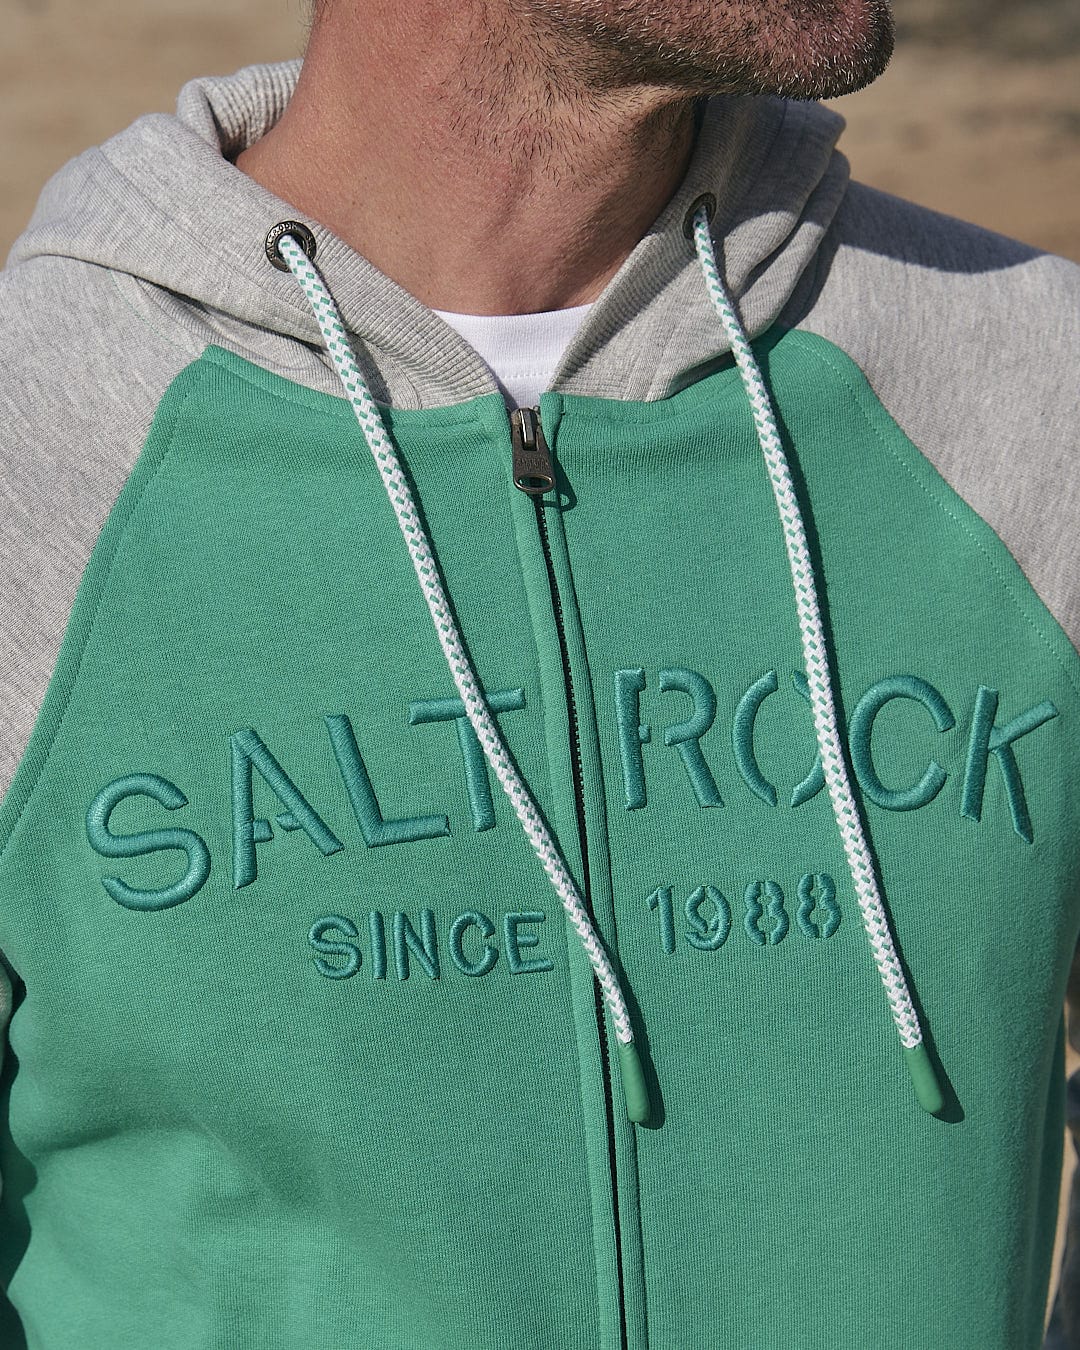 A man wearing a green and grey hoodie with the word Saltrock Stencil - Mens Zip Hoodie - Green on it.